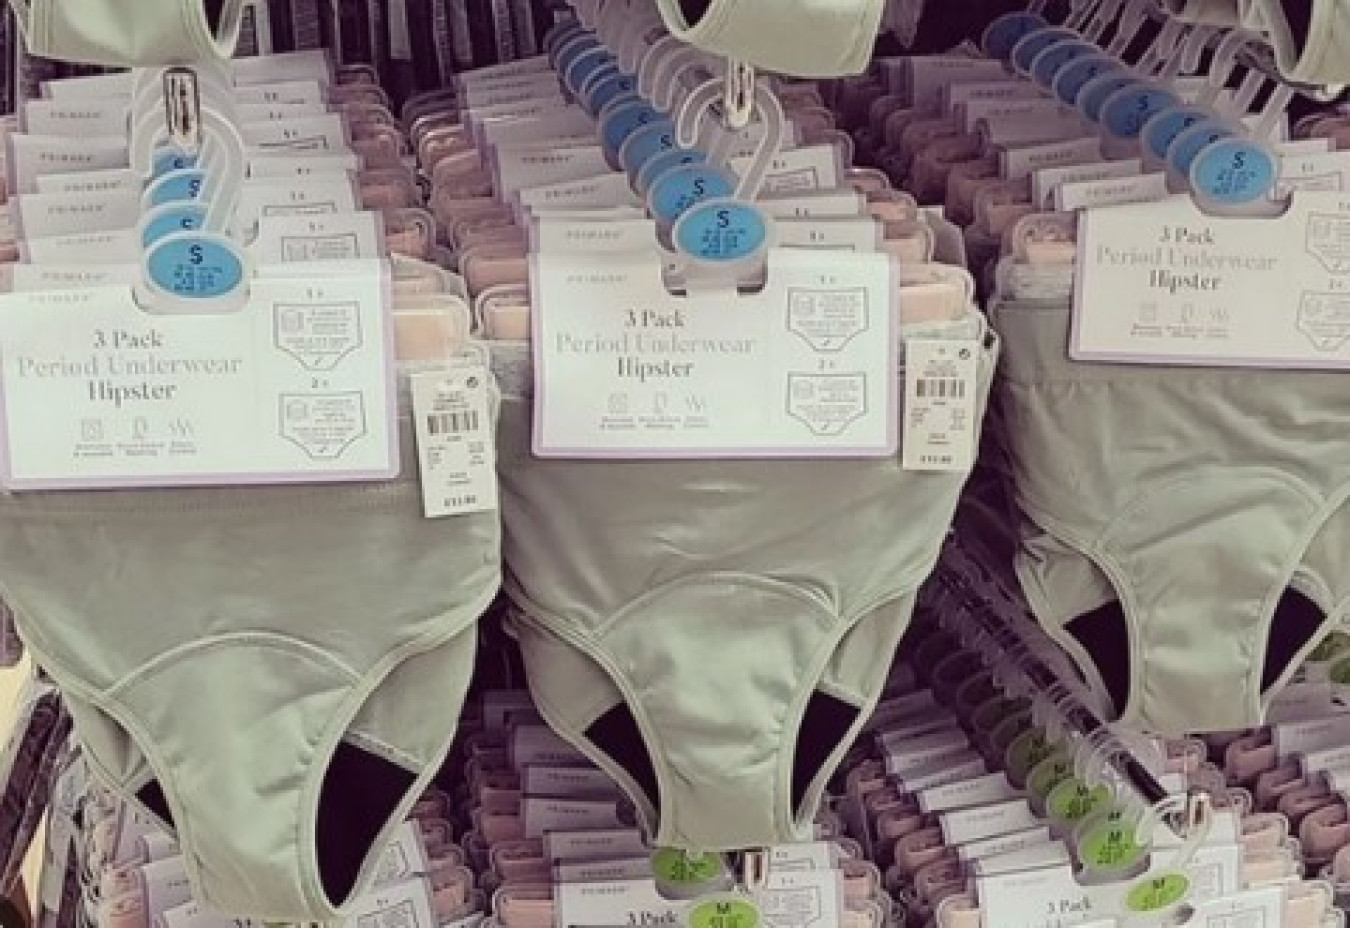 Women to save up to £2 on period pants as Government scraps VAT